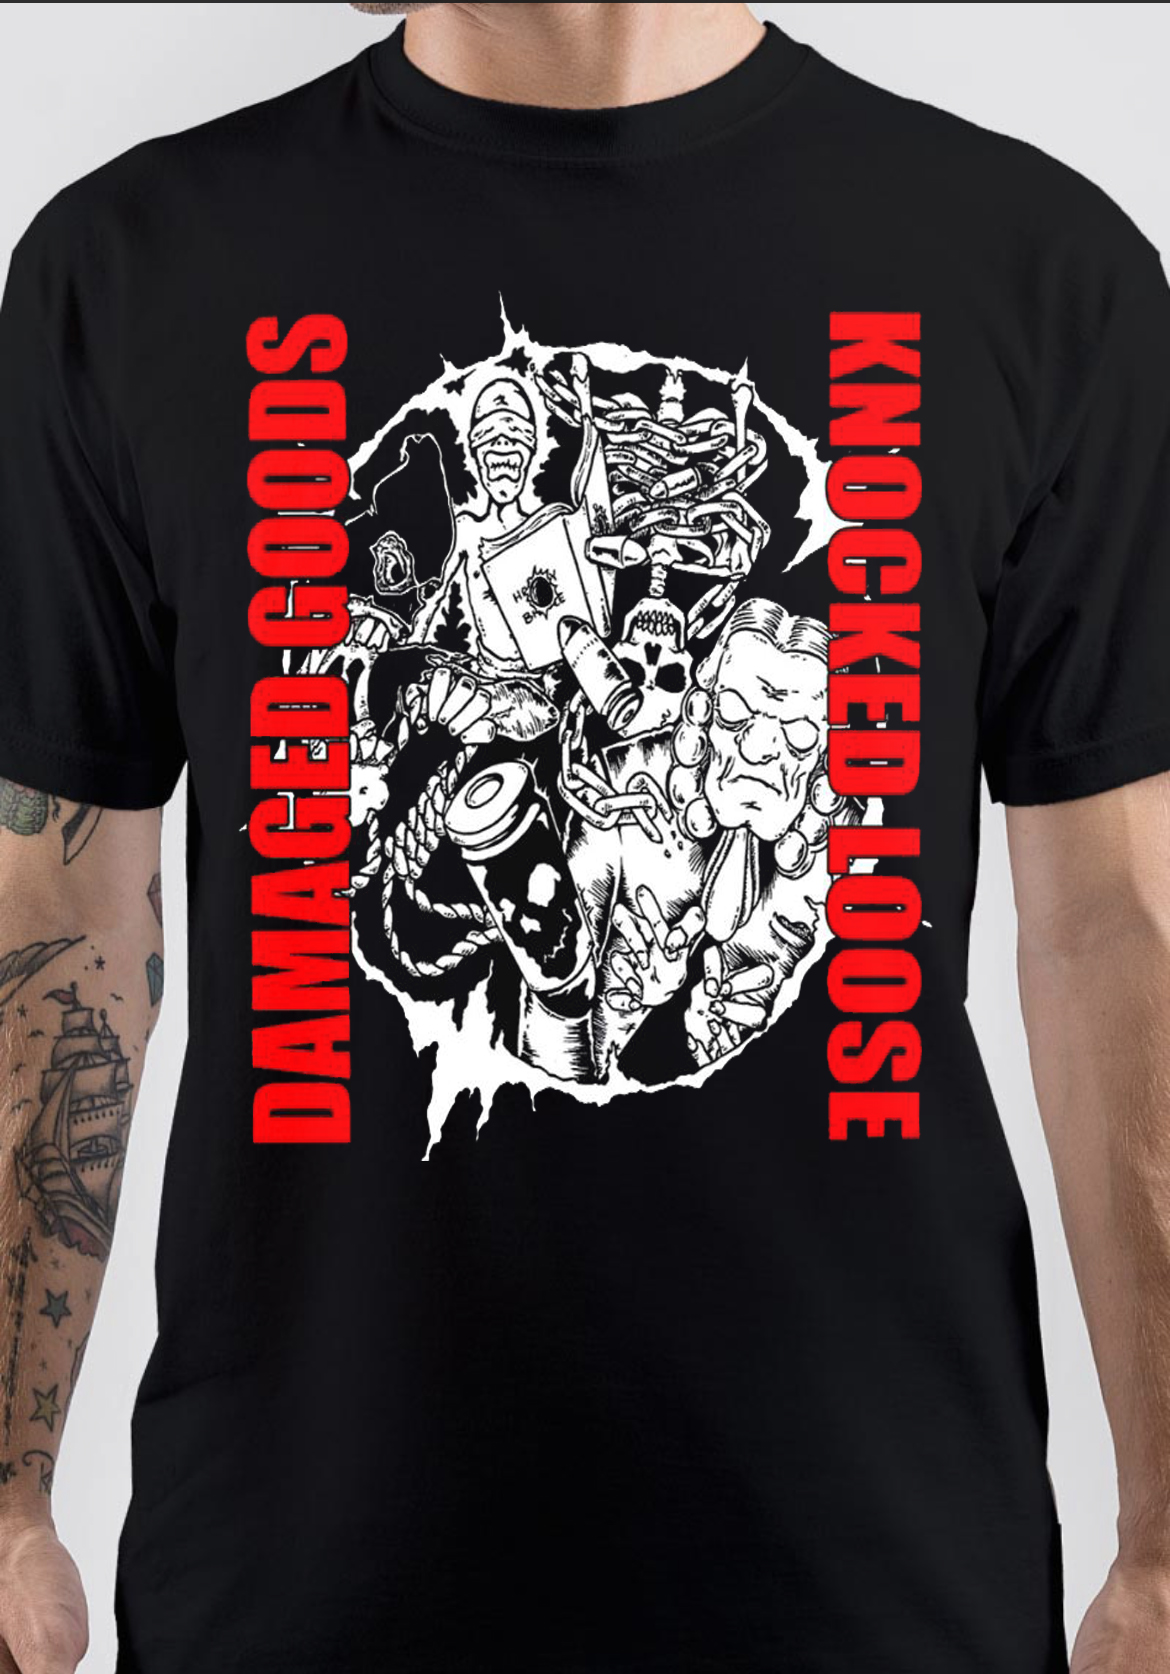 Knocked Loose- “Mistakes Like Fractures” - Black Shirt - No Tag